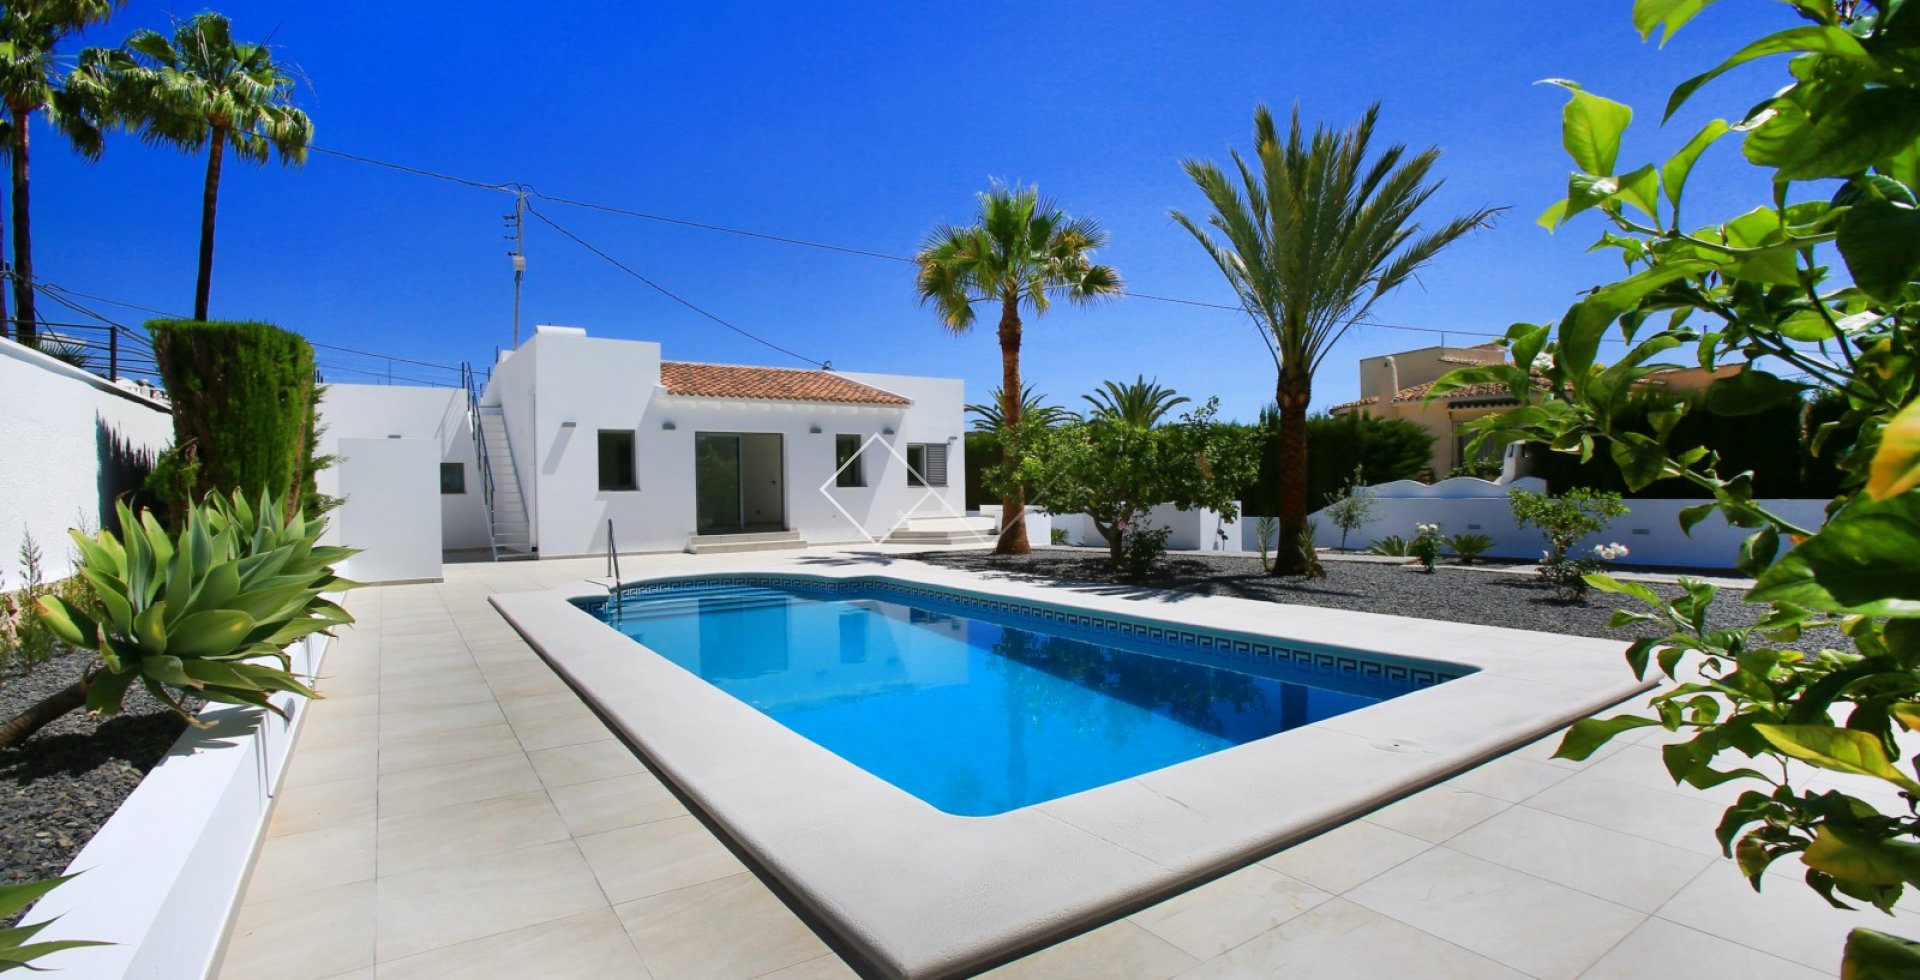 Renovated villa for sale in Benissa, 200m from the beach